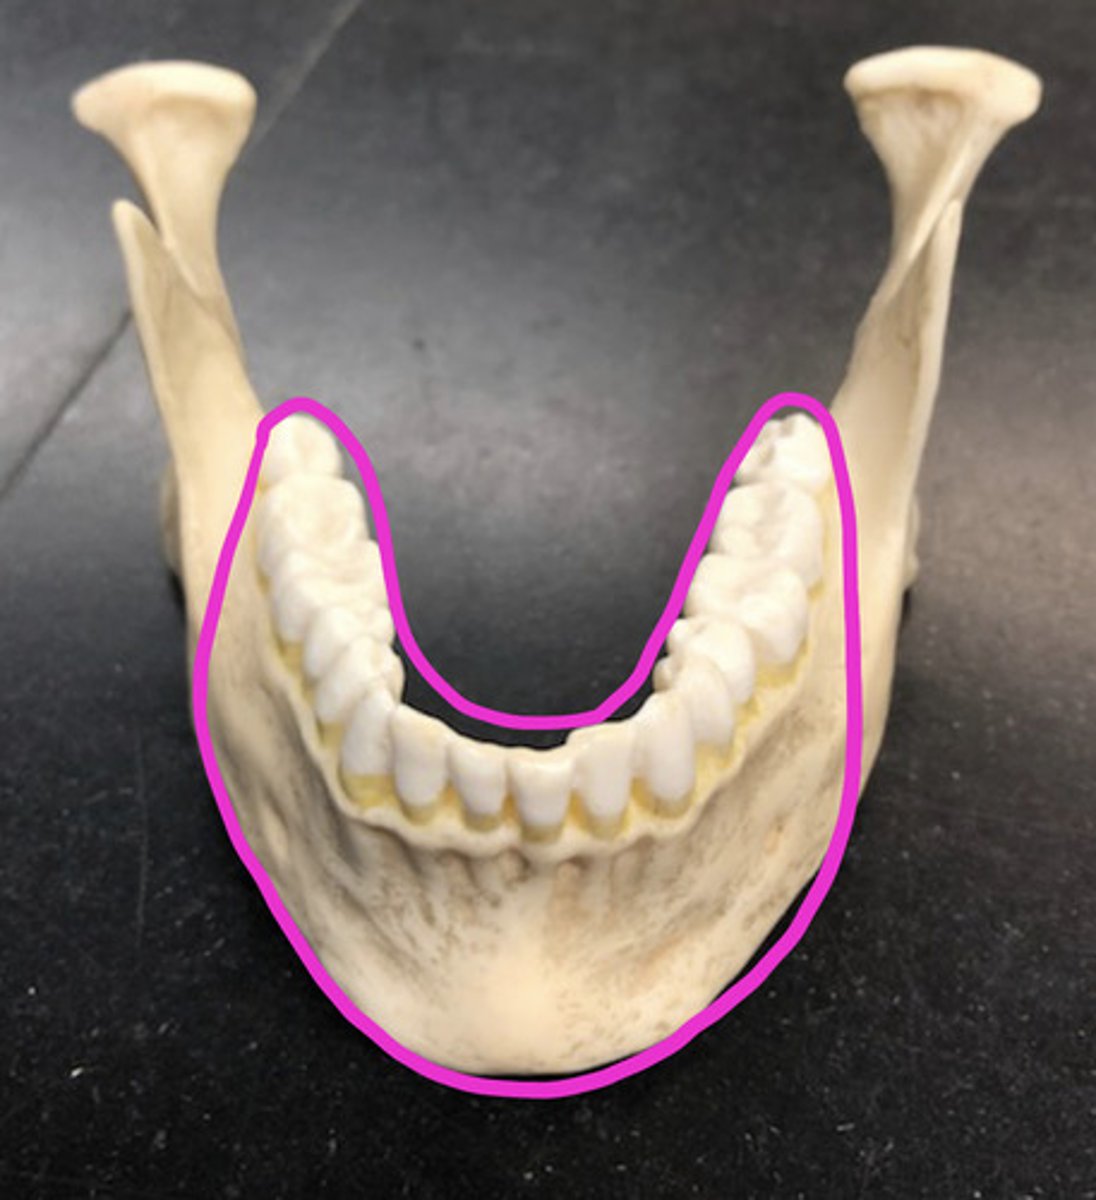 <p>Curved part where the teeth are</p>